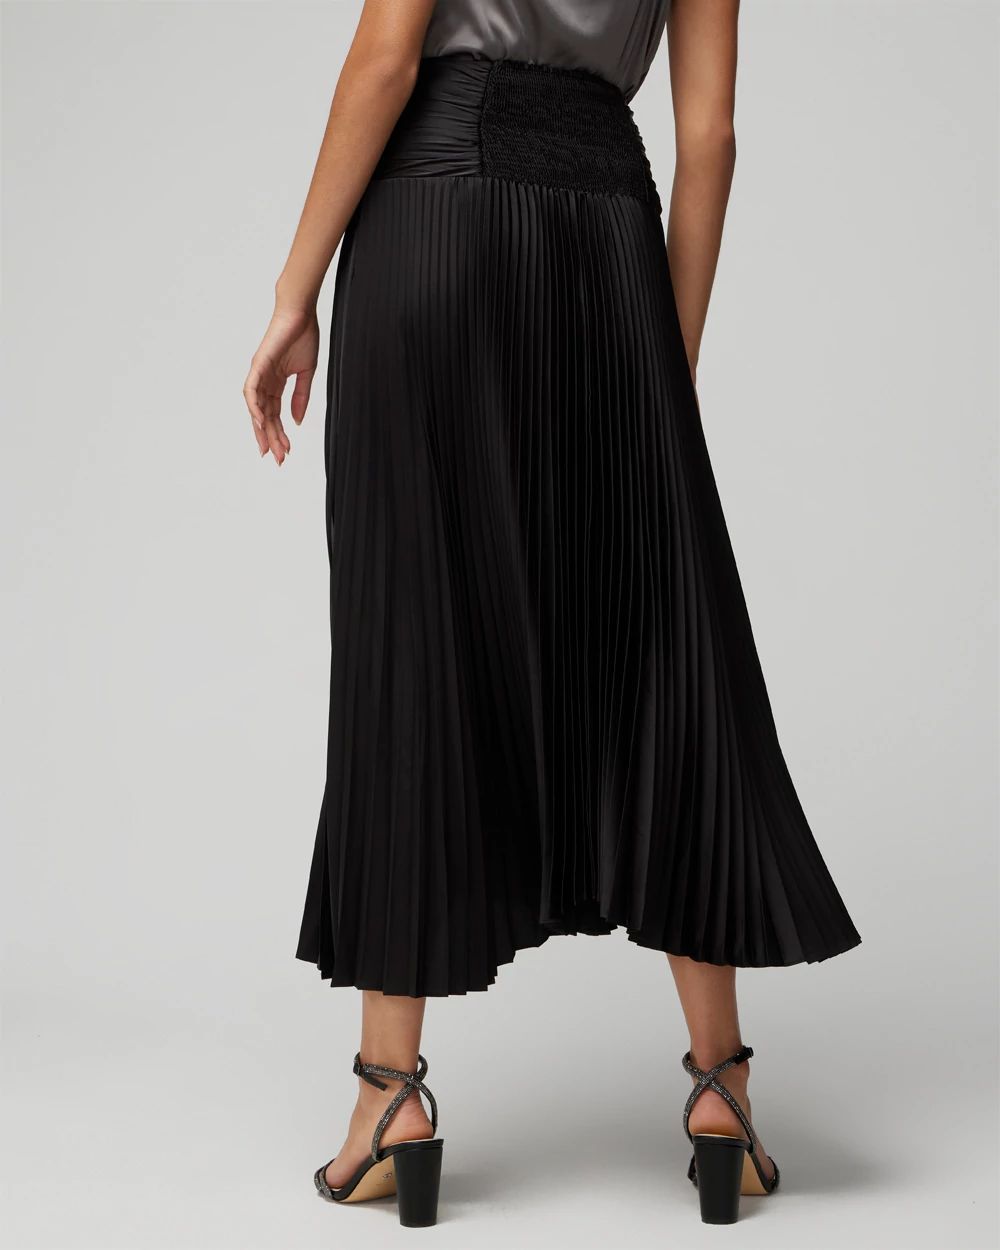 Petite Satin Pleated Midi Skirt click to view larger image.